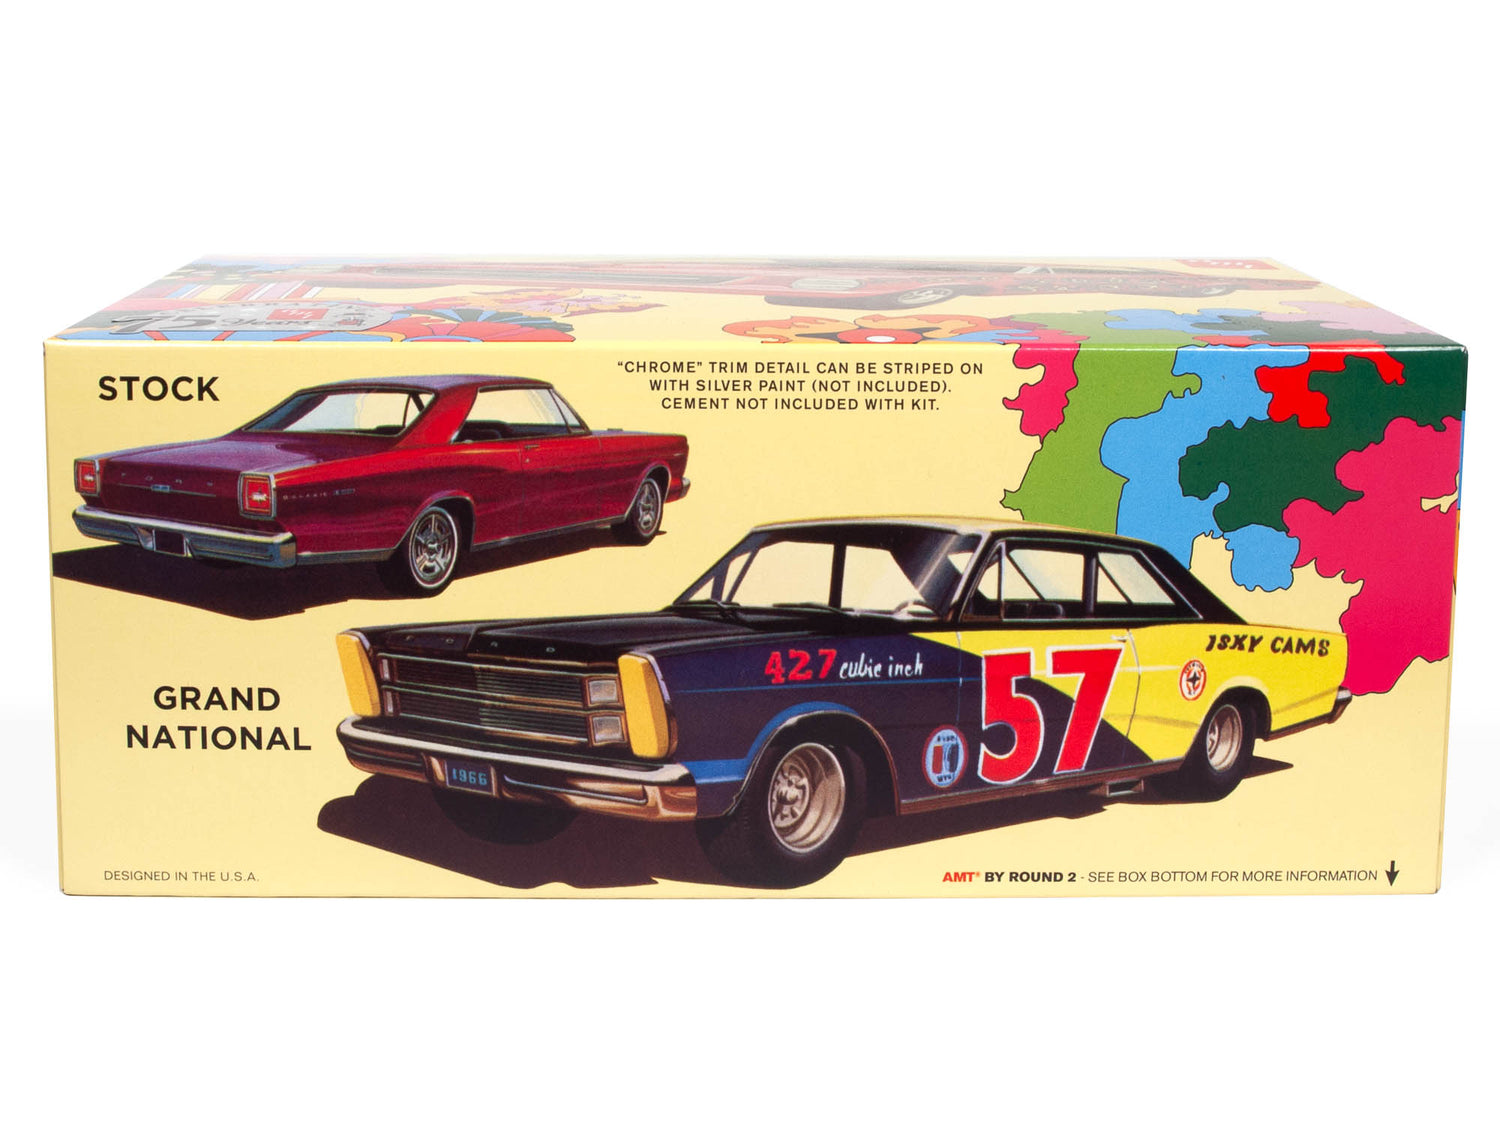 AMT 1966 Ford Galaxie "Sweet Bippy" 1:25 Scale Model Kit